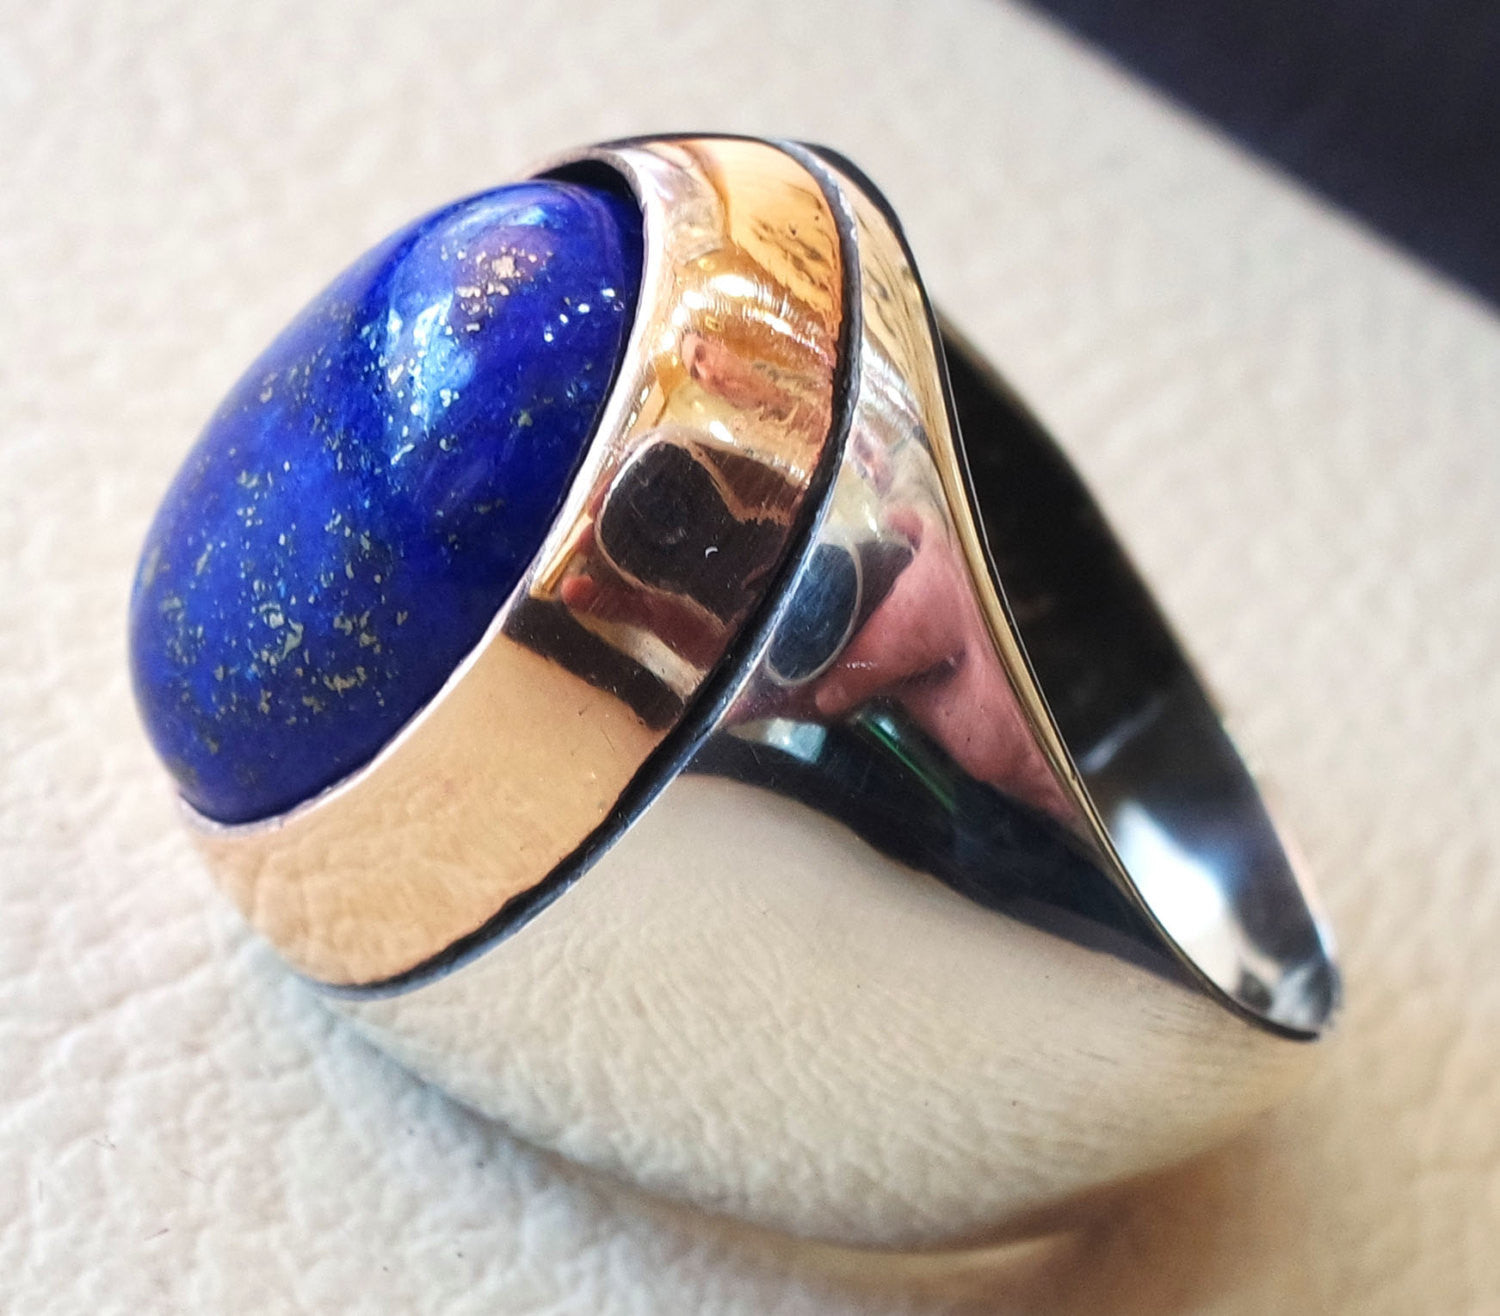 lapis lazuli oval cabochon natural blue stone ring bronze and sterling silver 925 men jewelry all sizes 18 * 13 mm ottoman middle eastern